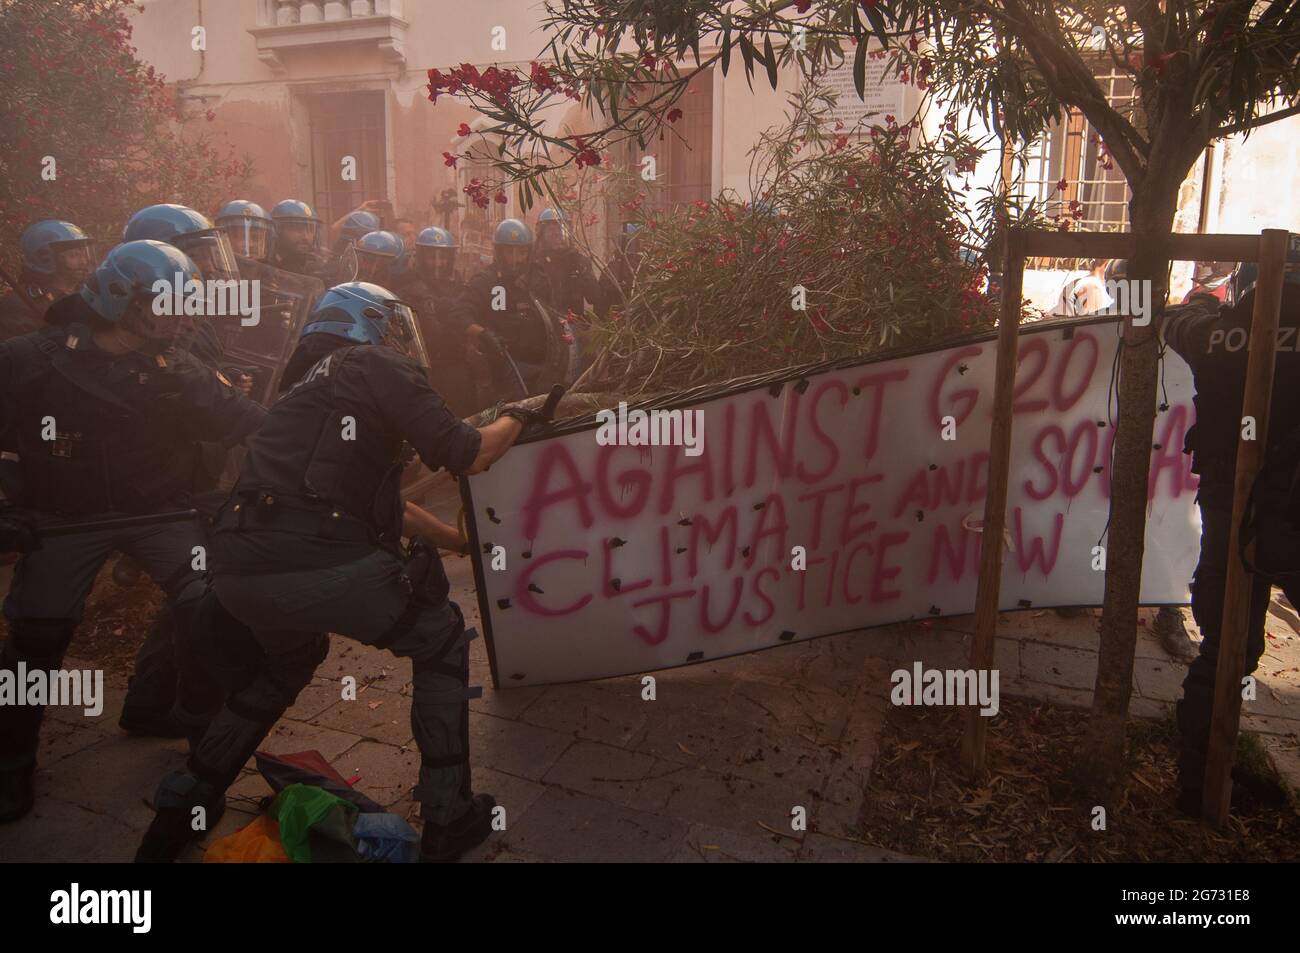 Venice, Italy. 10th July, 2021. Protestors and police clash during the demonstration 'We are the tide, you are only (G)20' on July 10, 2021 in Venice, Italy. For their third meeting under the Italian G20 presidency, on 9 and 10 July 2021, G20 Finance Ministers and Central Bank Governors (FMCBG) gathered in Venice for a two-day summit on issues related to global economy and health © Simone Padovani / Awakening / Alamy Live News Stock Photo